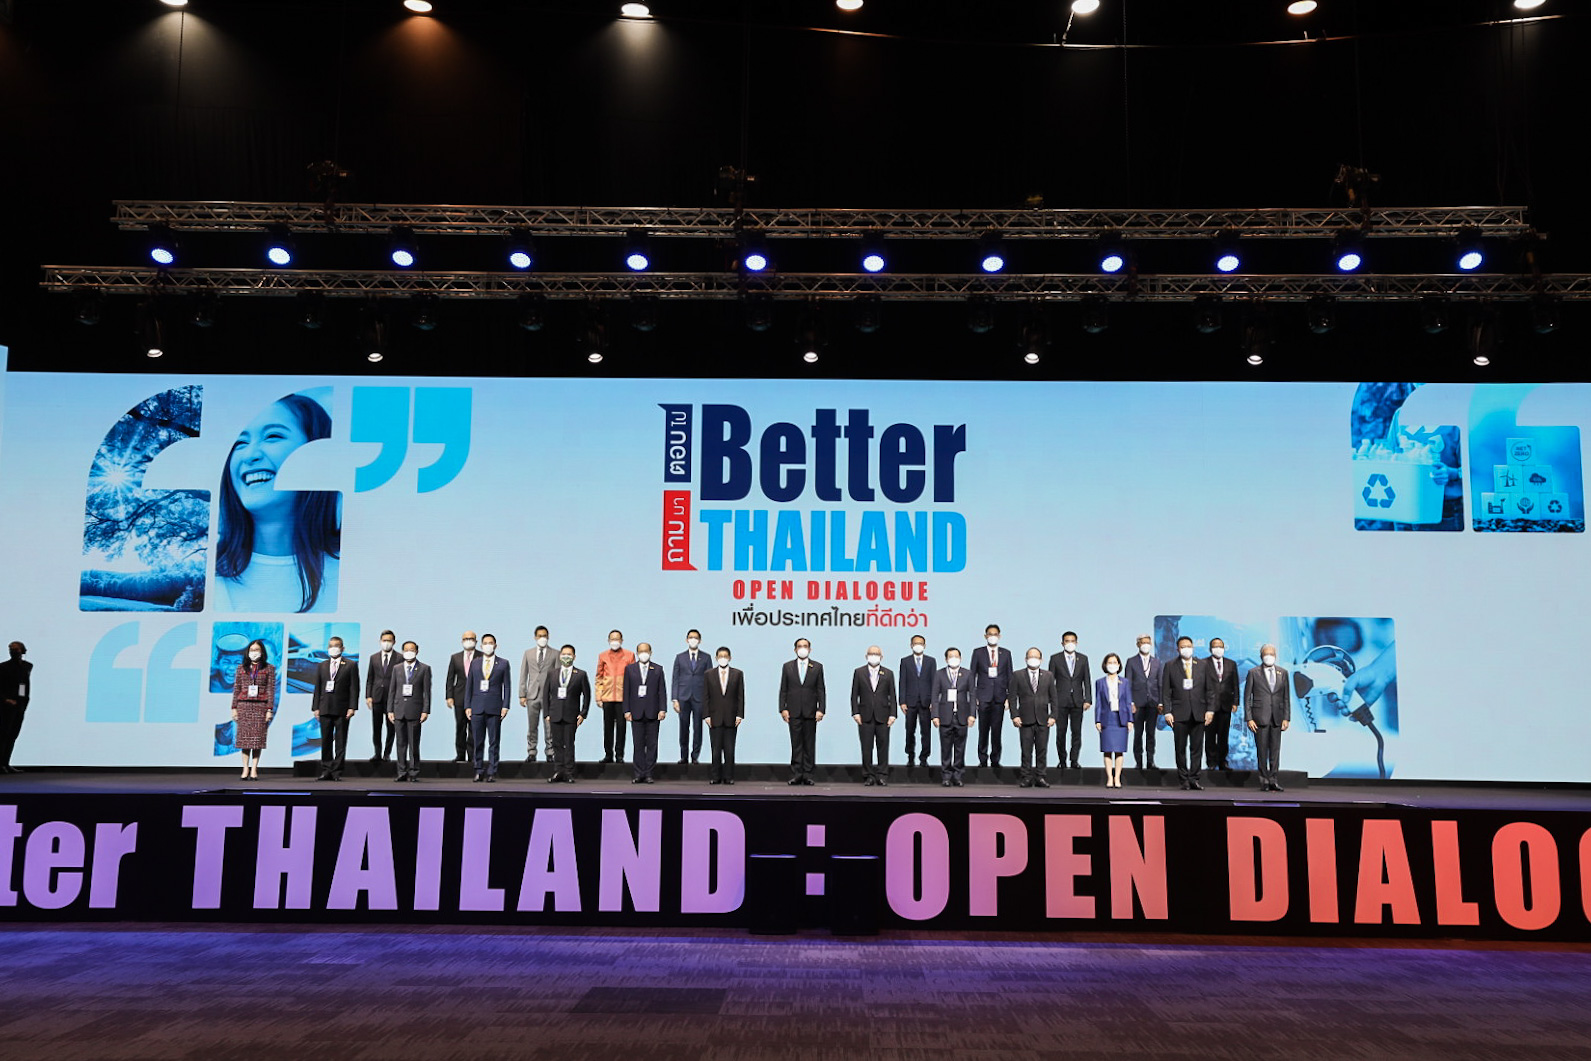 Labour Minister Joins the “Better Thailand Open Dialogue”